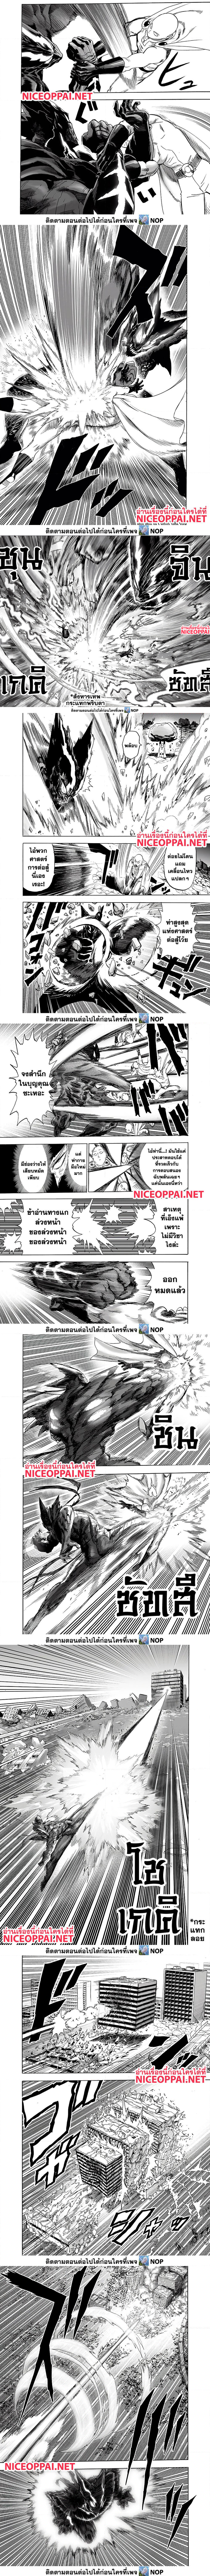 One Punch Man 163 (2)